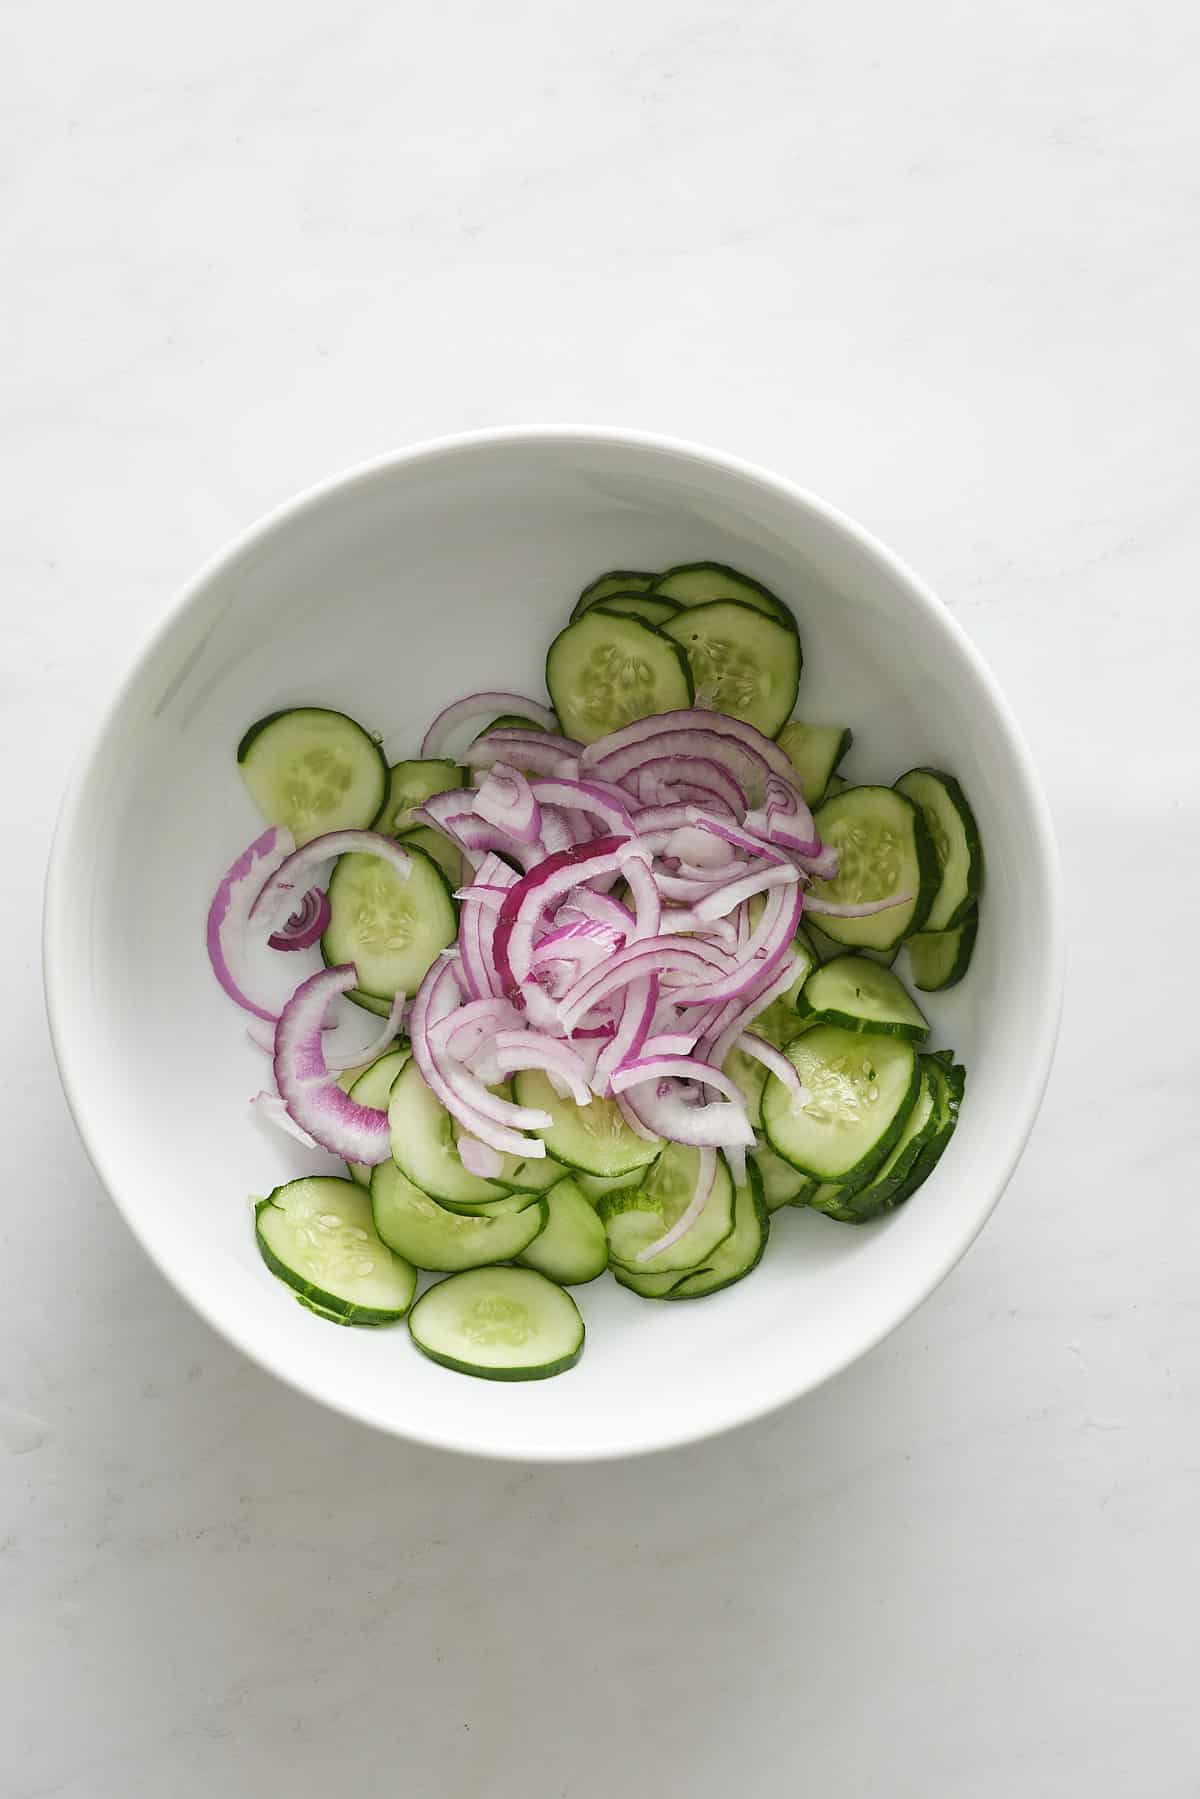 Sliced red onion and cucumbers in a bowl.